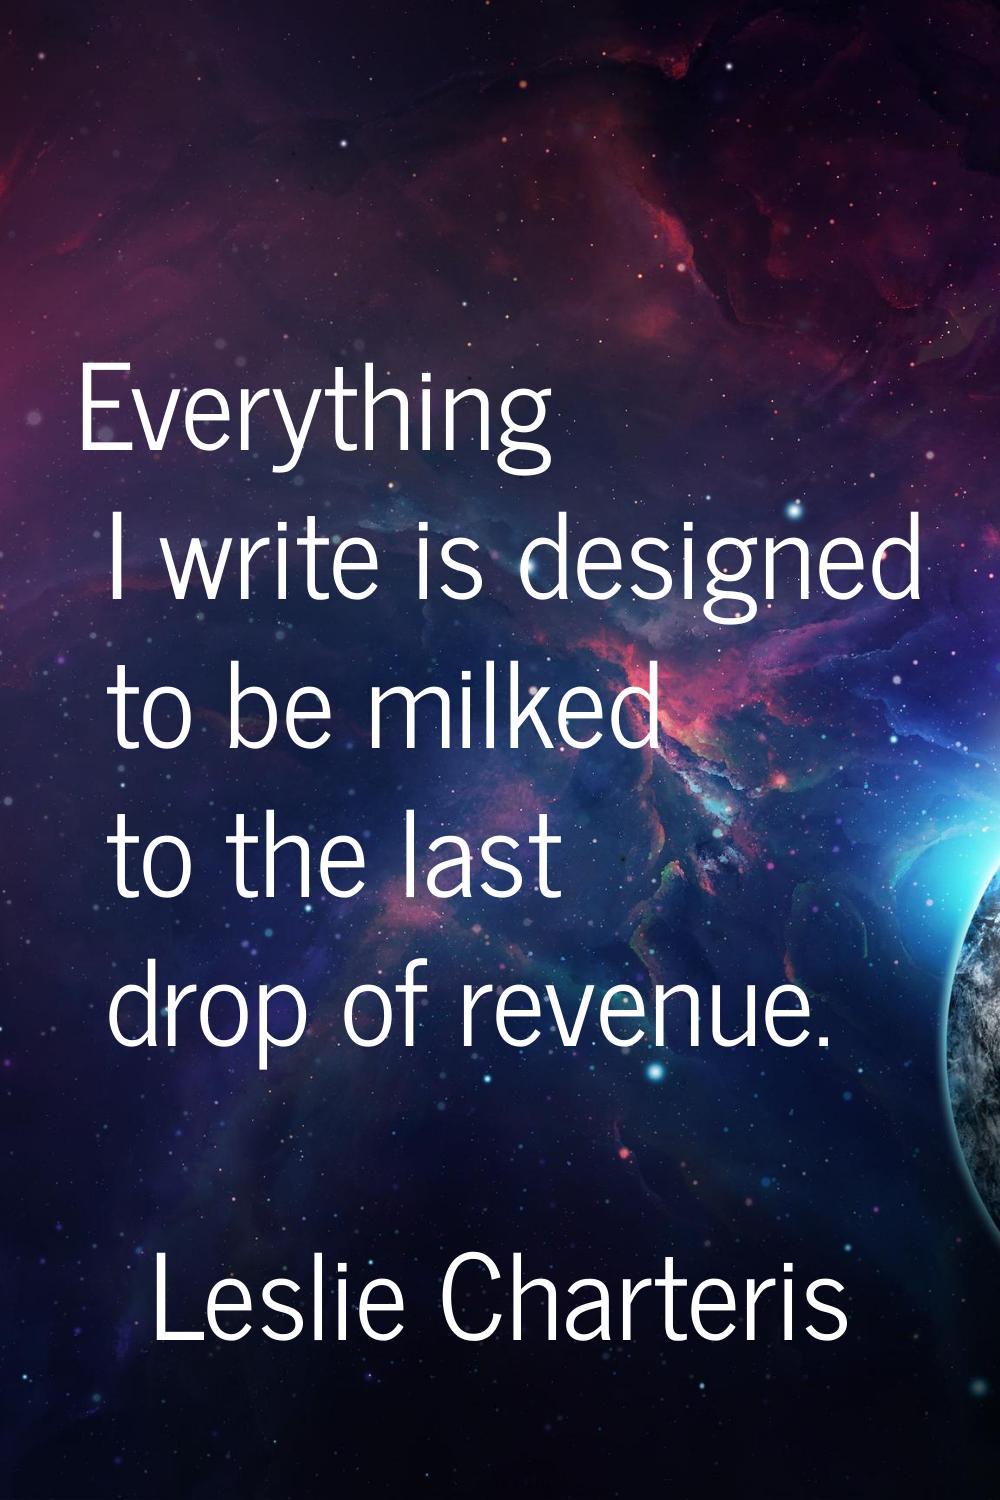 Everything I write is designed to be milked to the last drop of revenue.